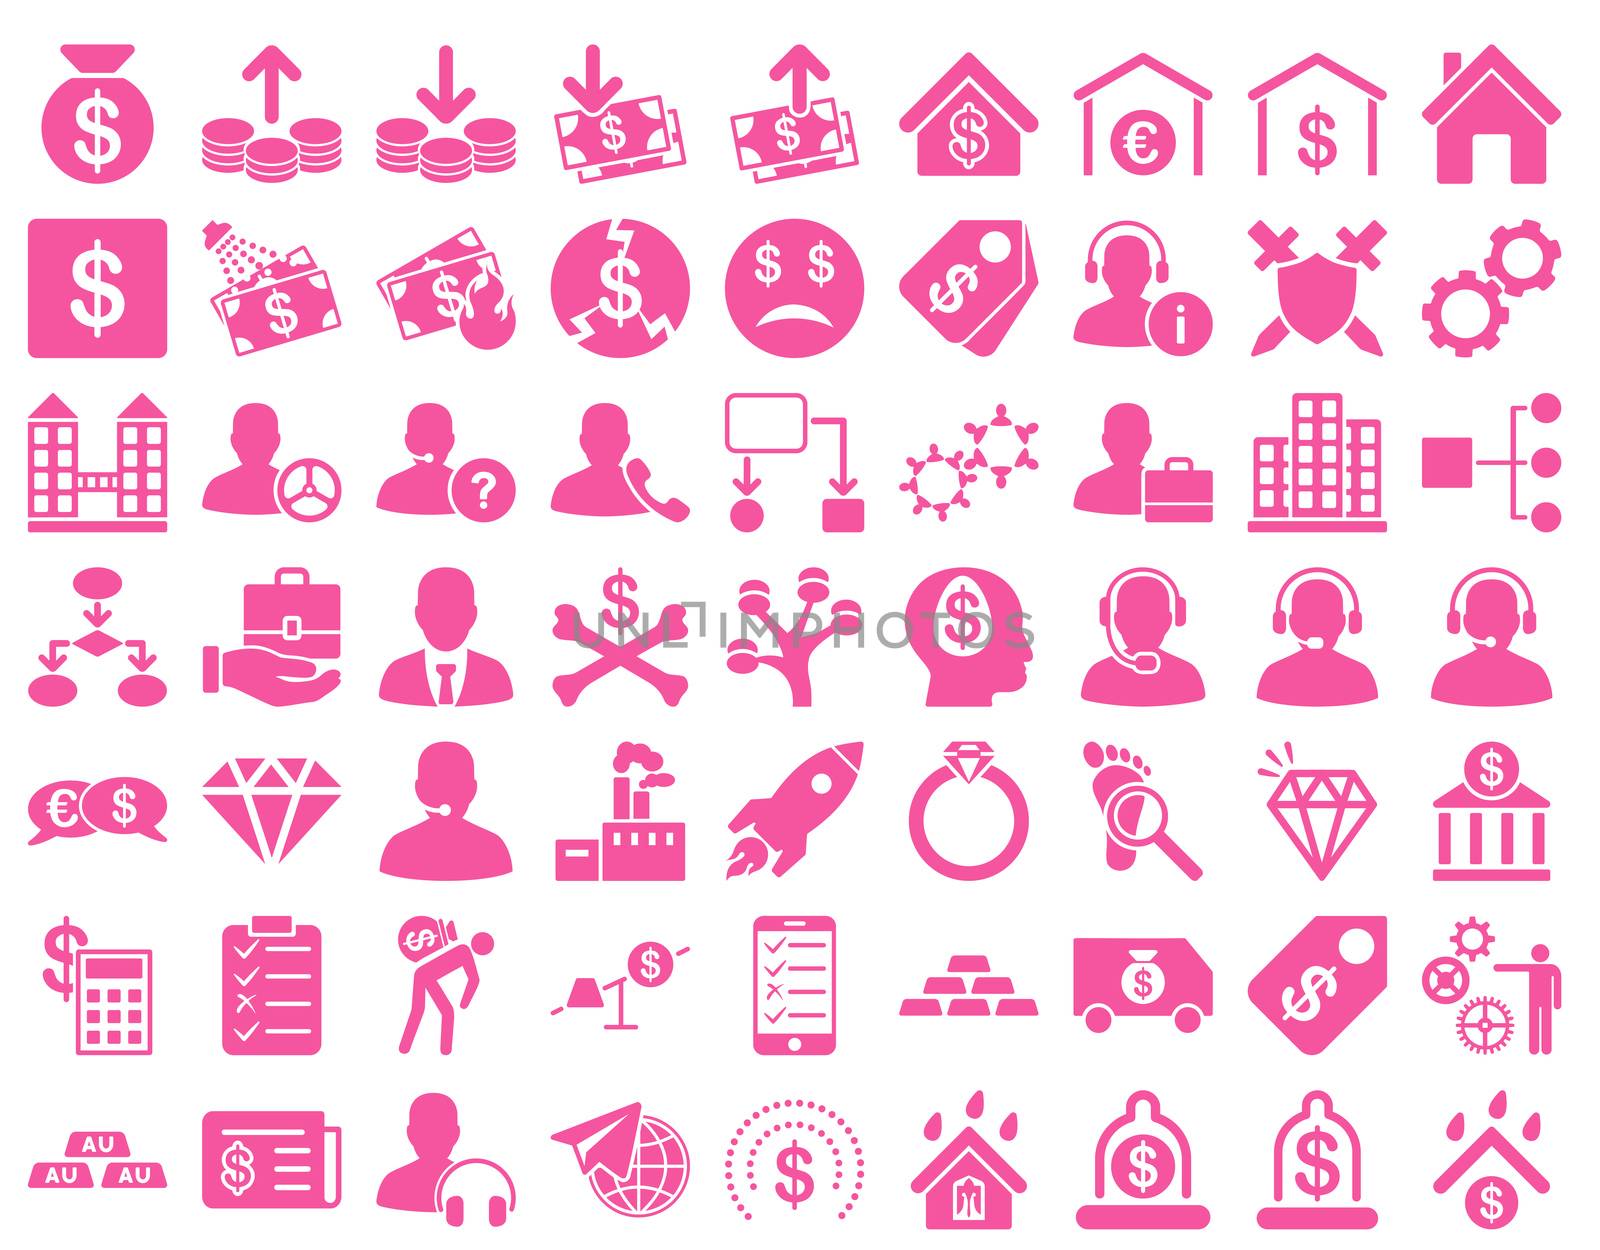 Commerce Icons. These flat icons use pink color. Raster images are isolated on a white background.